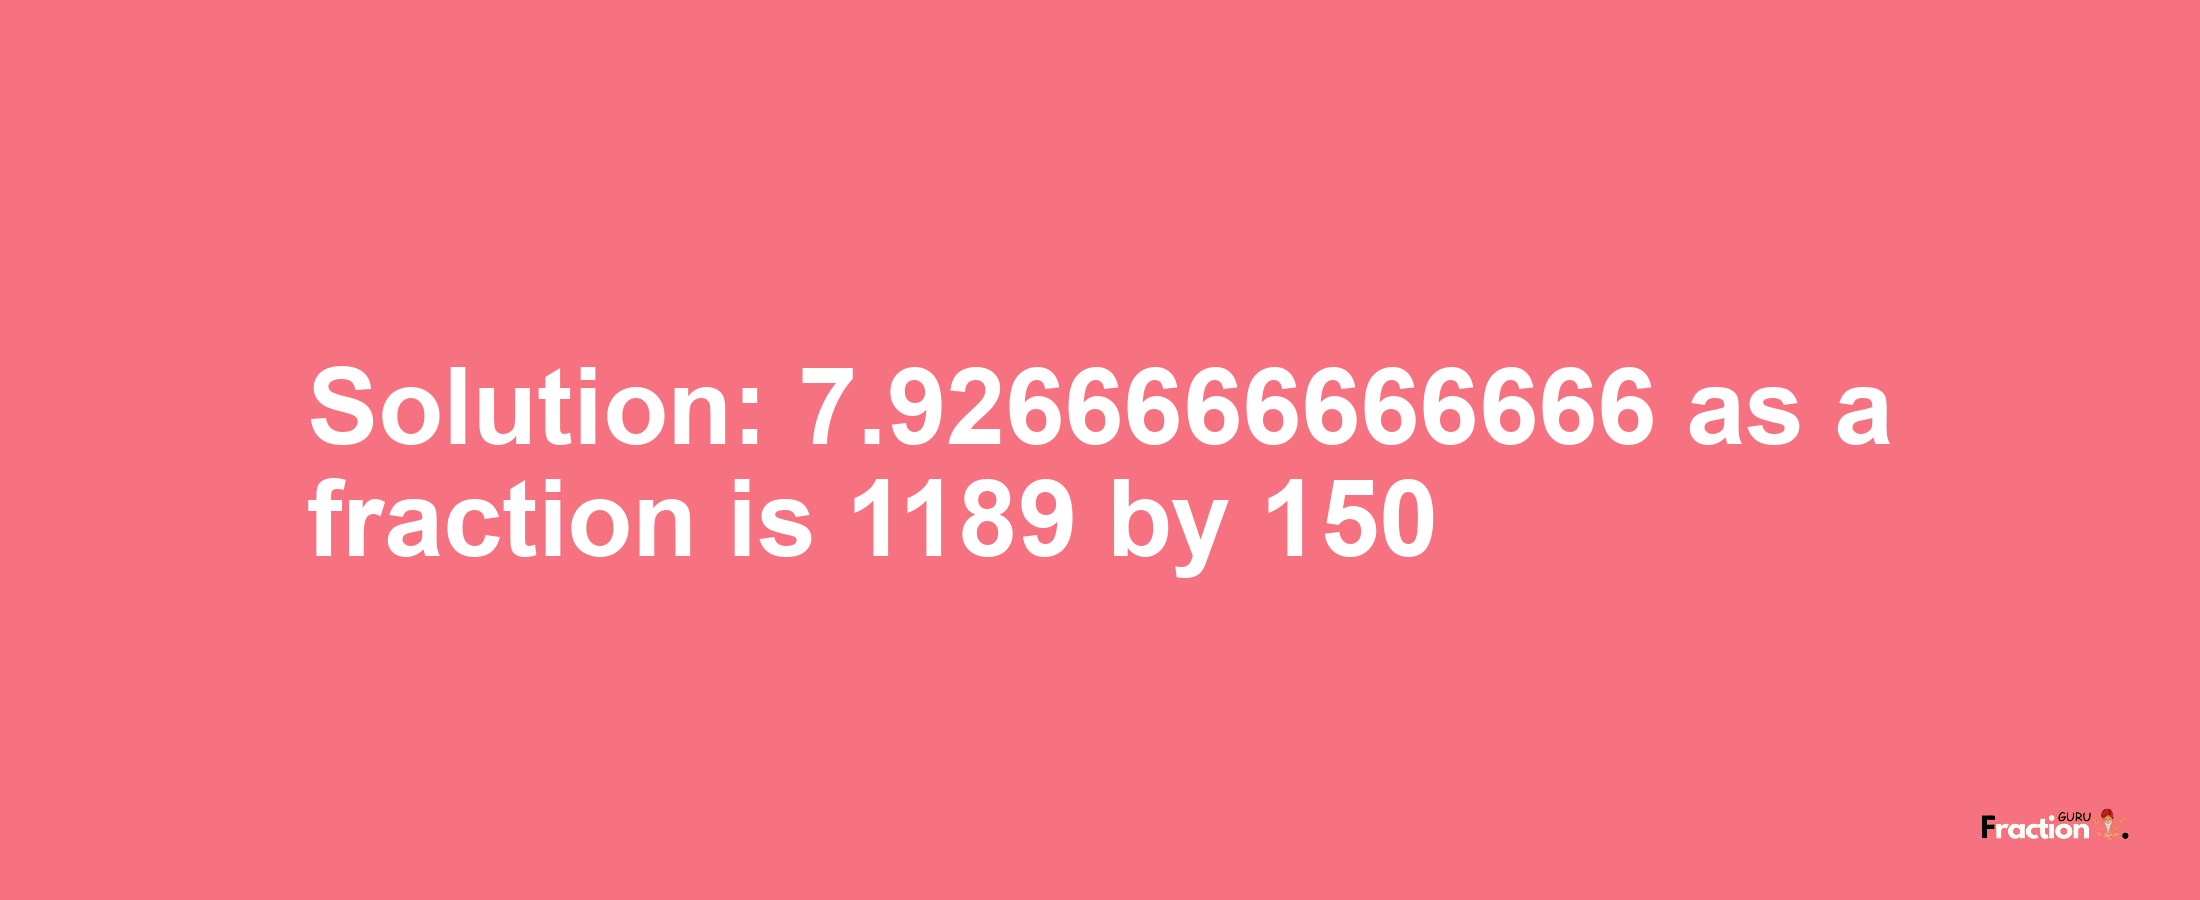 Solution:7.9266666666666 as a fraction is 1189/150